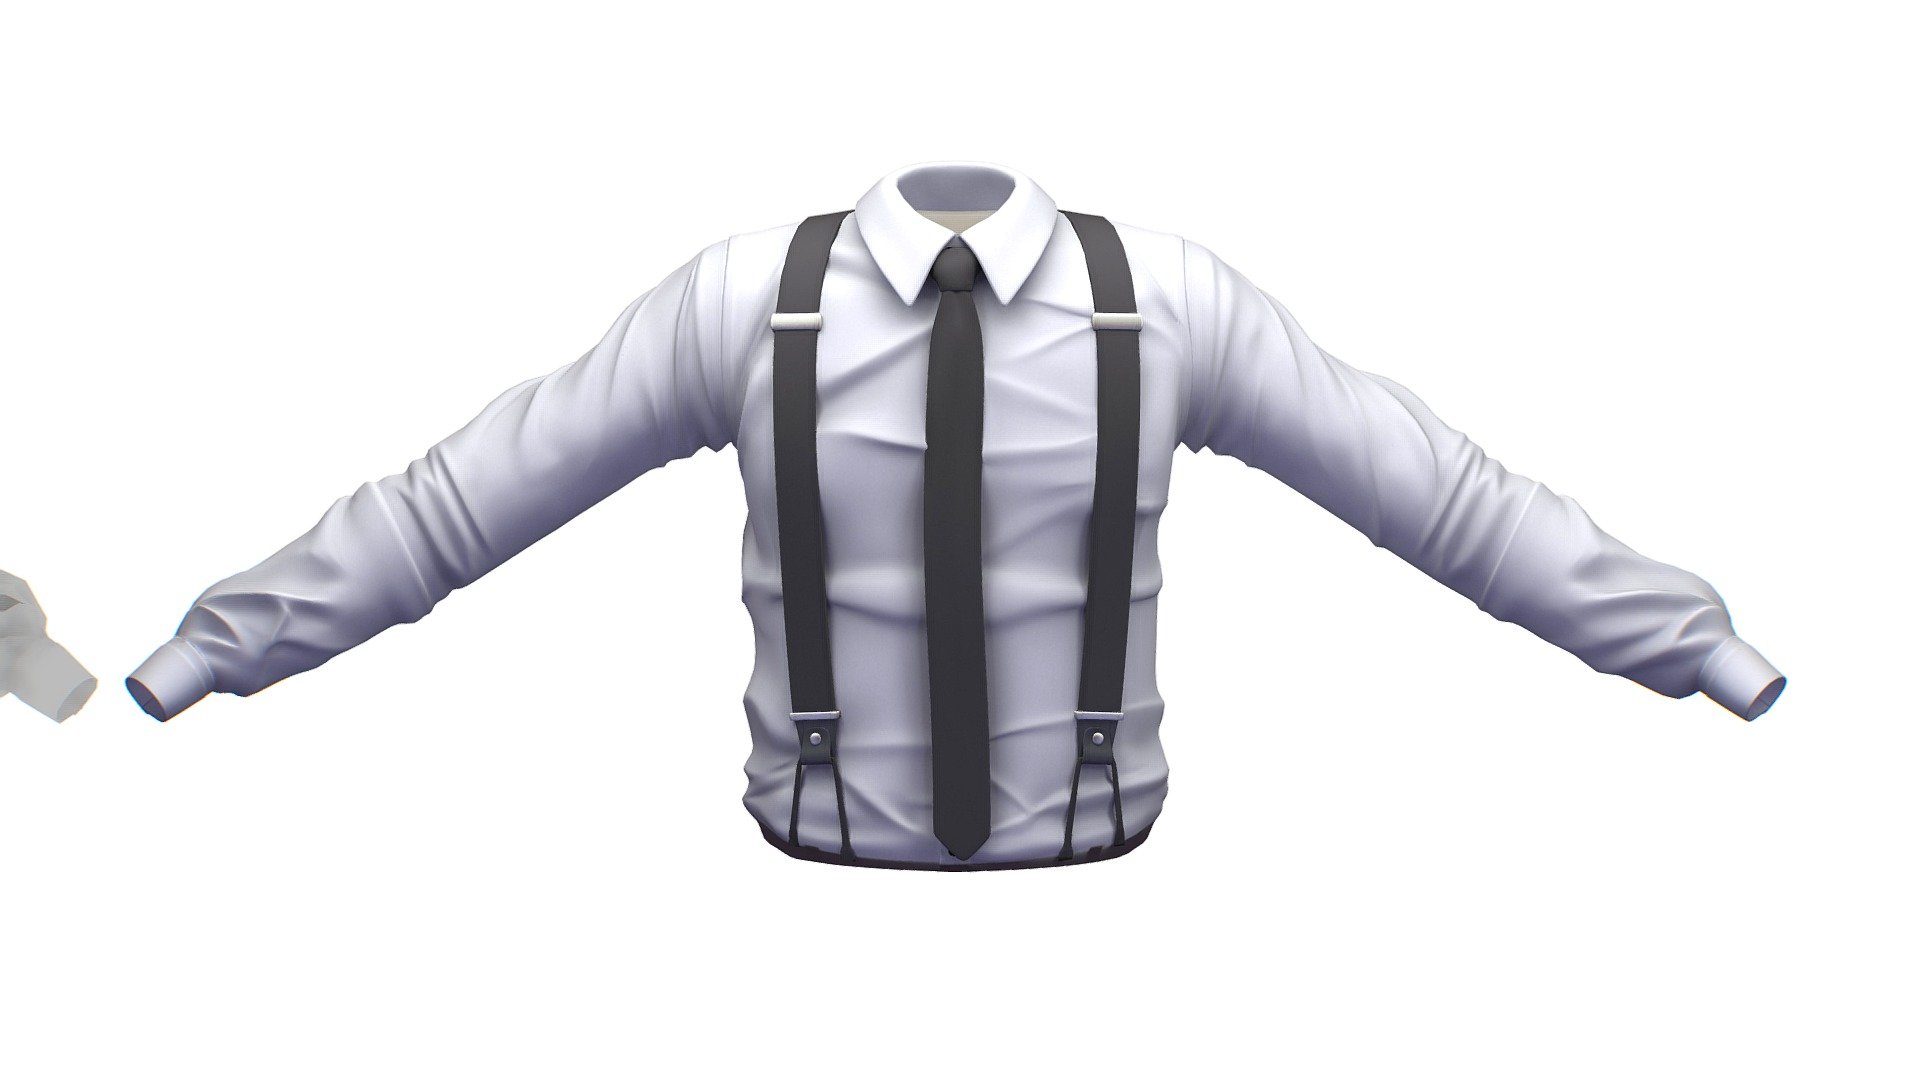 Cartoon High Poly Subdivision White Tie Shirt

No HDRI map, No Light, No material settings - only Diffuse/Color Map Texture (2700Х2700) 

More information about the 3D model: please use the Sketchfab Model Inspector - Key (i) - Cartoon High Poly Subdivision White Tie Shirt - Buy Royalty Free 3D model by Oleg Shuldiakov (@olegshuldiakov) 3d model